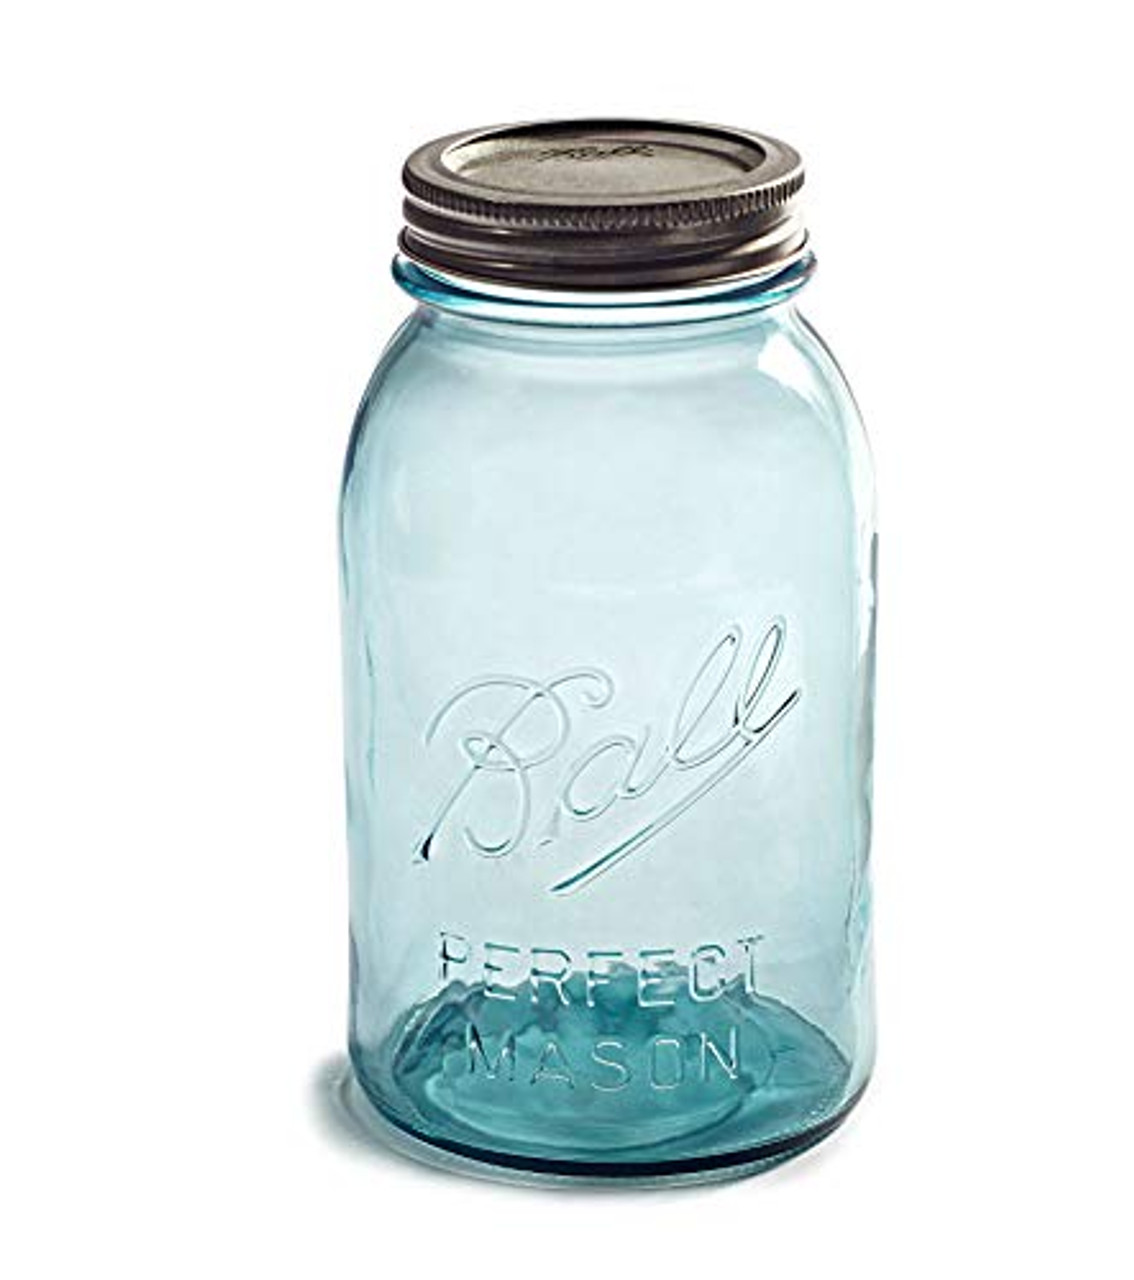 Who Made That Mason Jar? - The New York Times